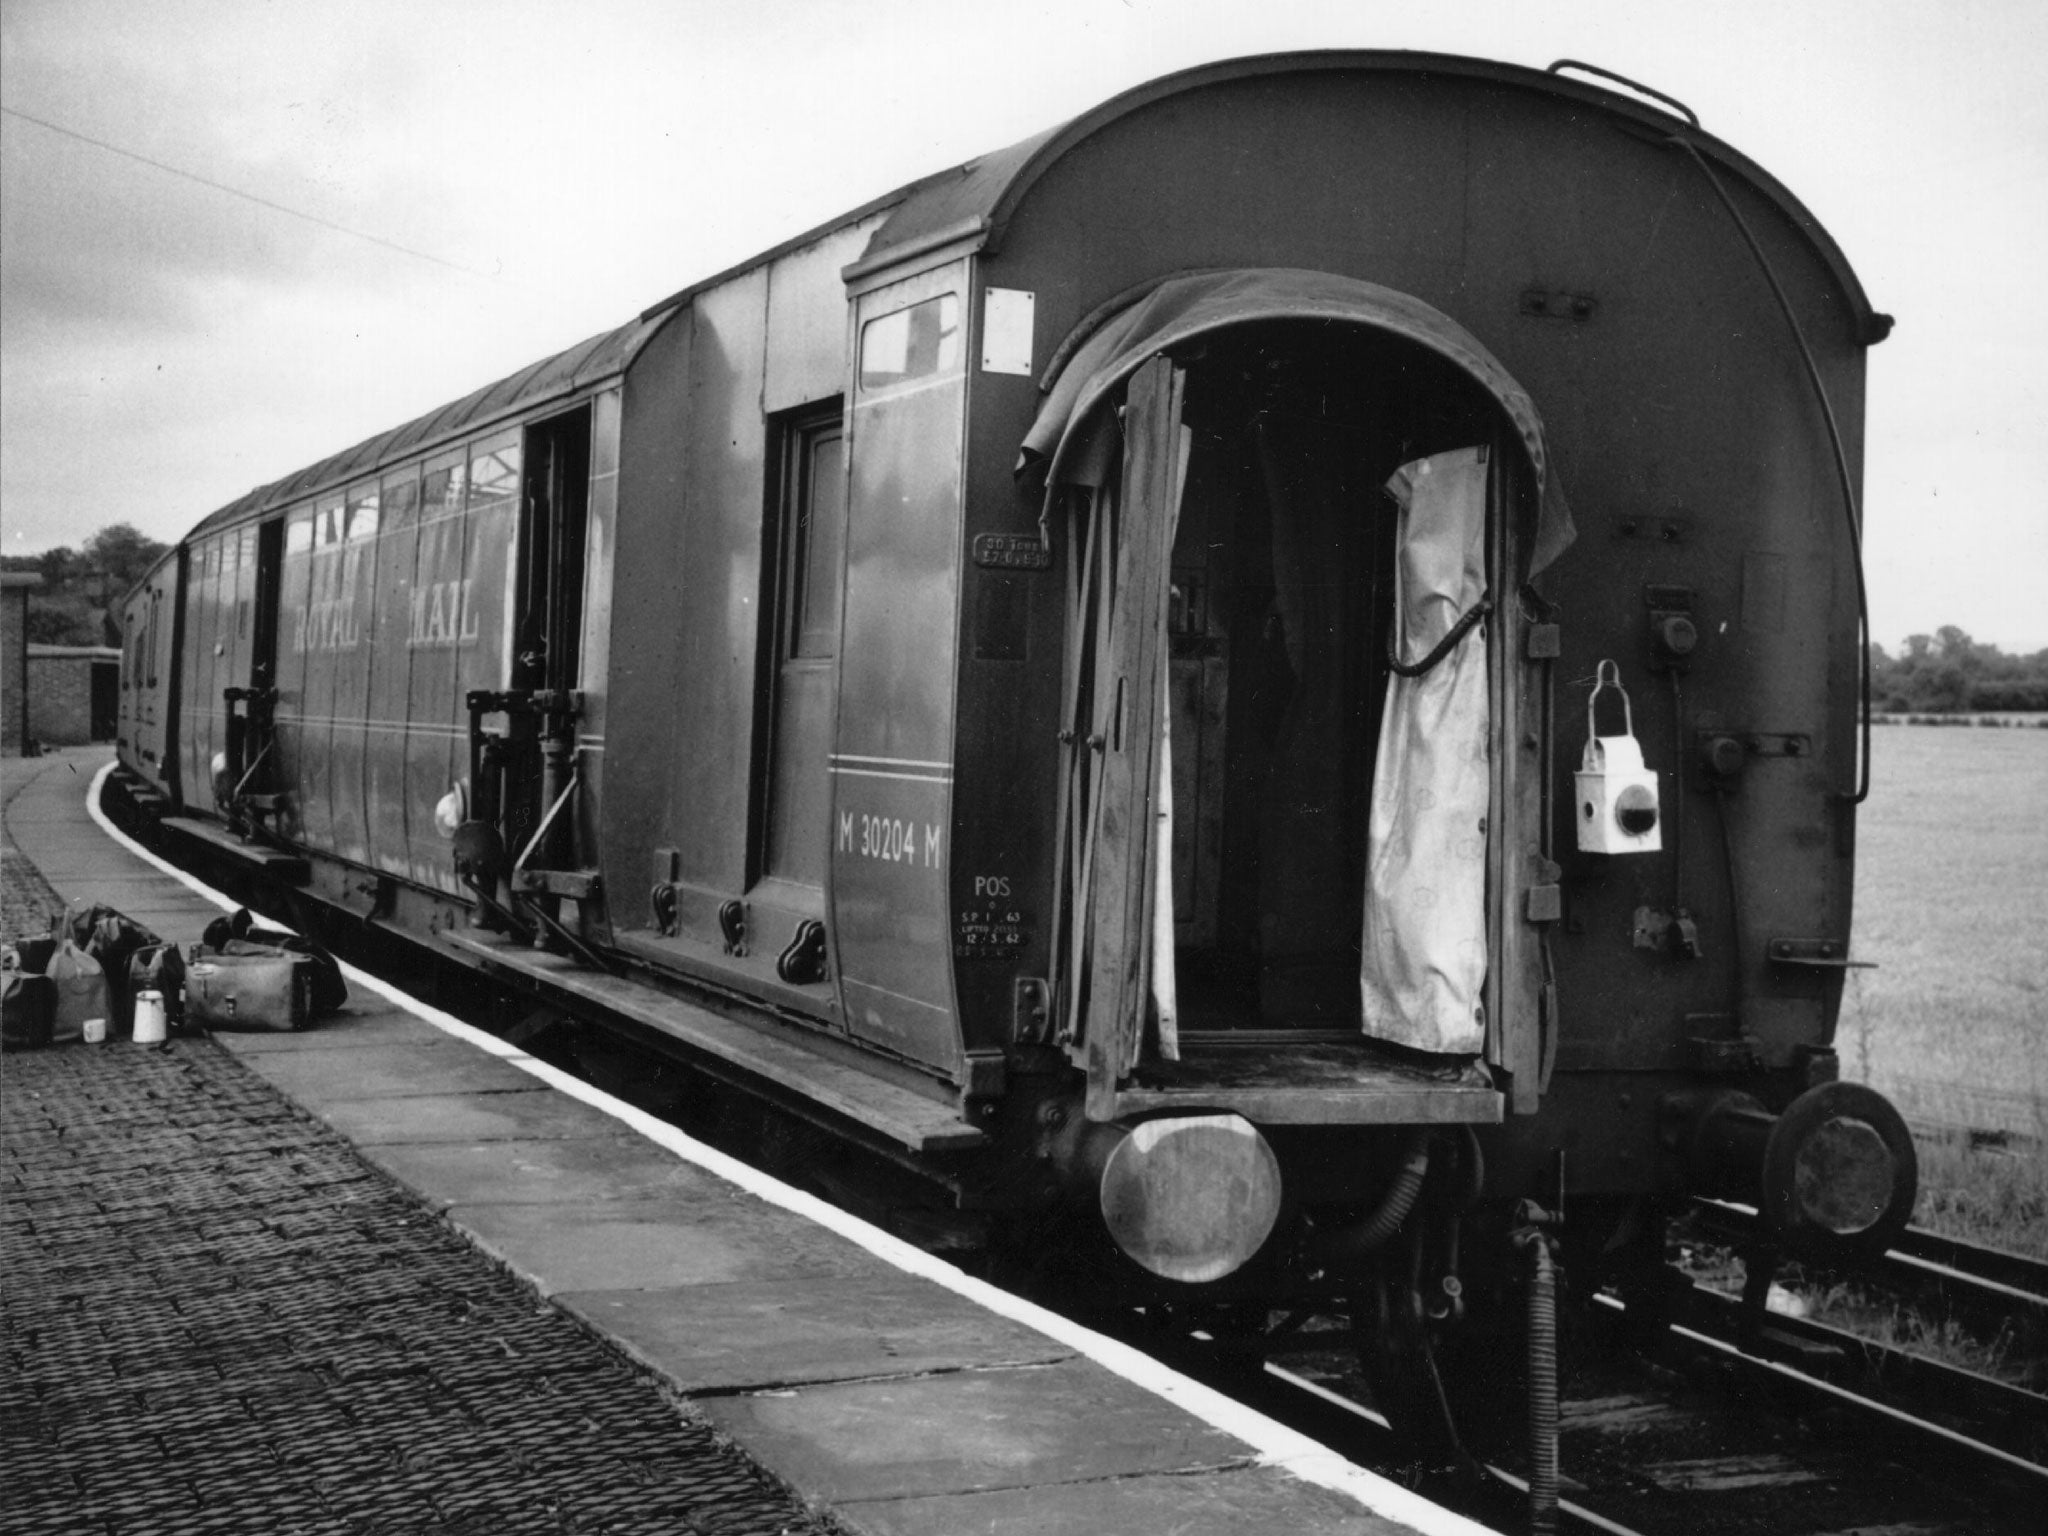 The uncoupled train coaches at Cheddington Station after the Great Train Robbery